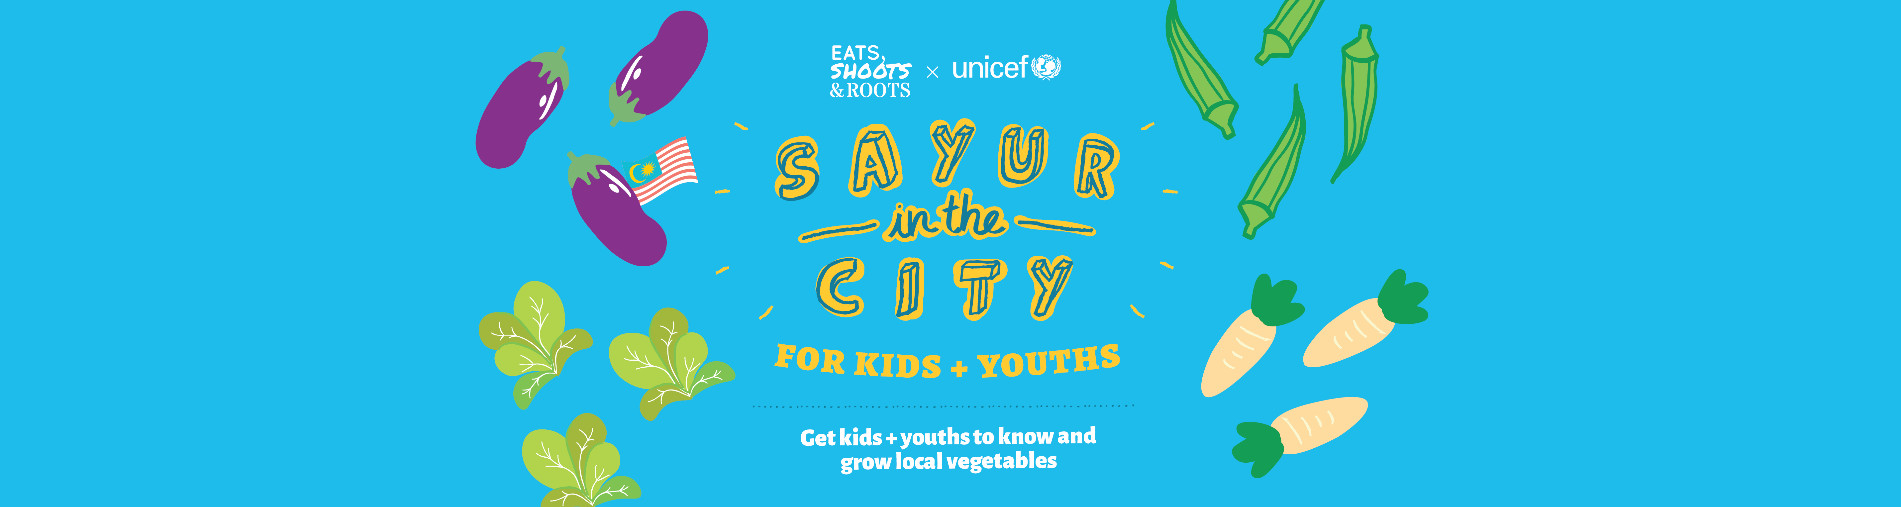 Sayur In The City: For Kids & Youths